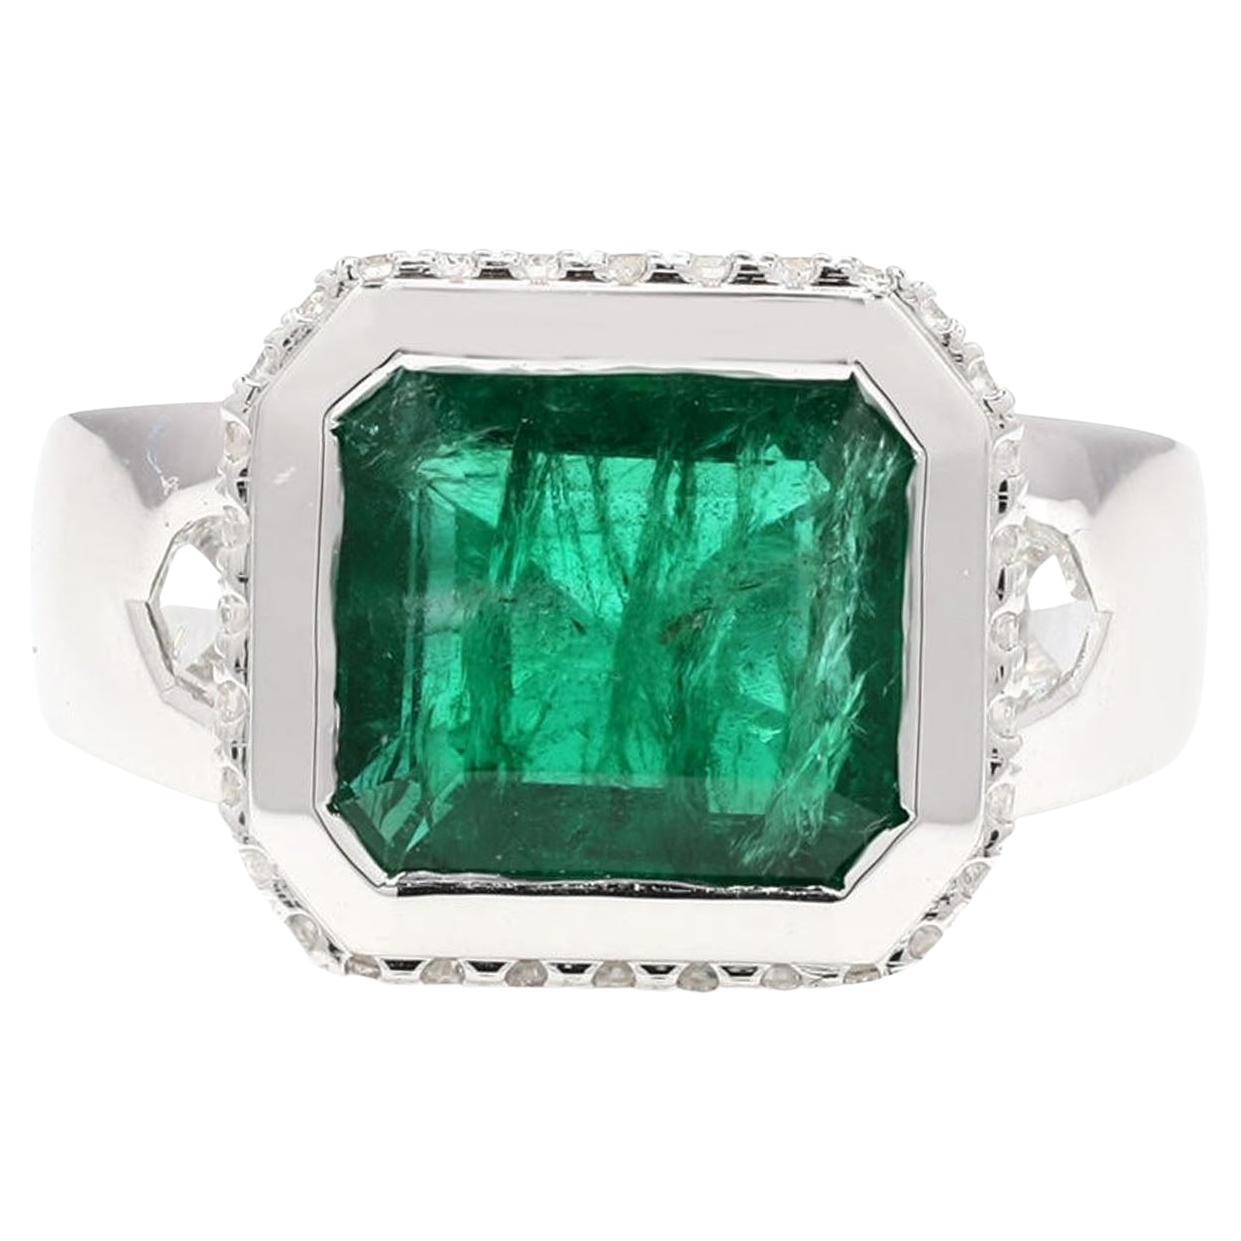 Square Octogen Cut Zambian Emerald Unisex Ring with Diamonds in 18k White Gold